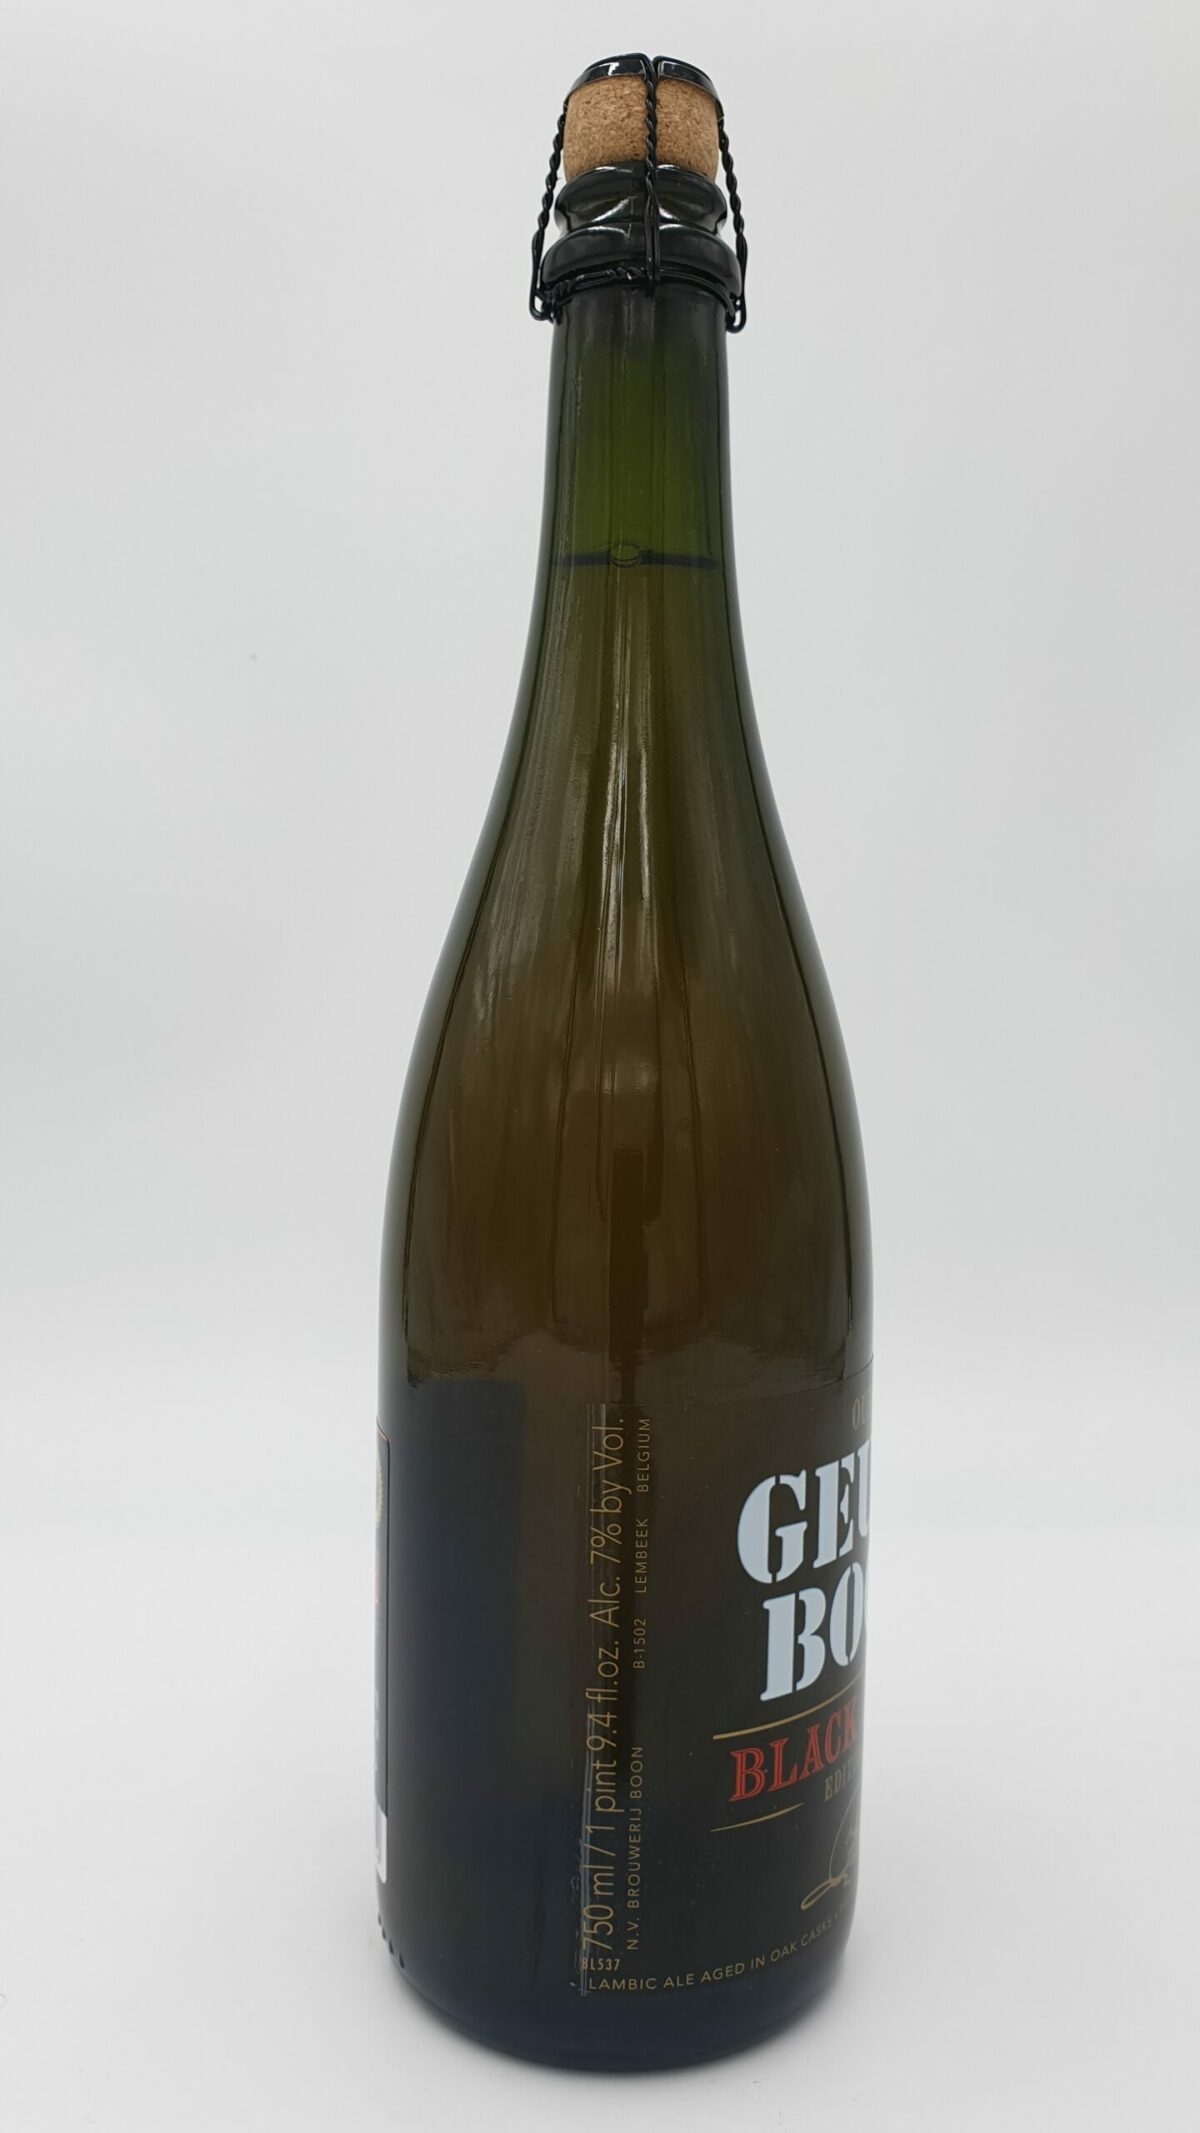 boon oude geuze black label edition 5